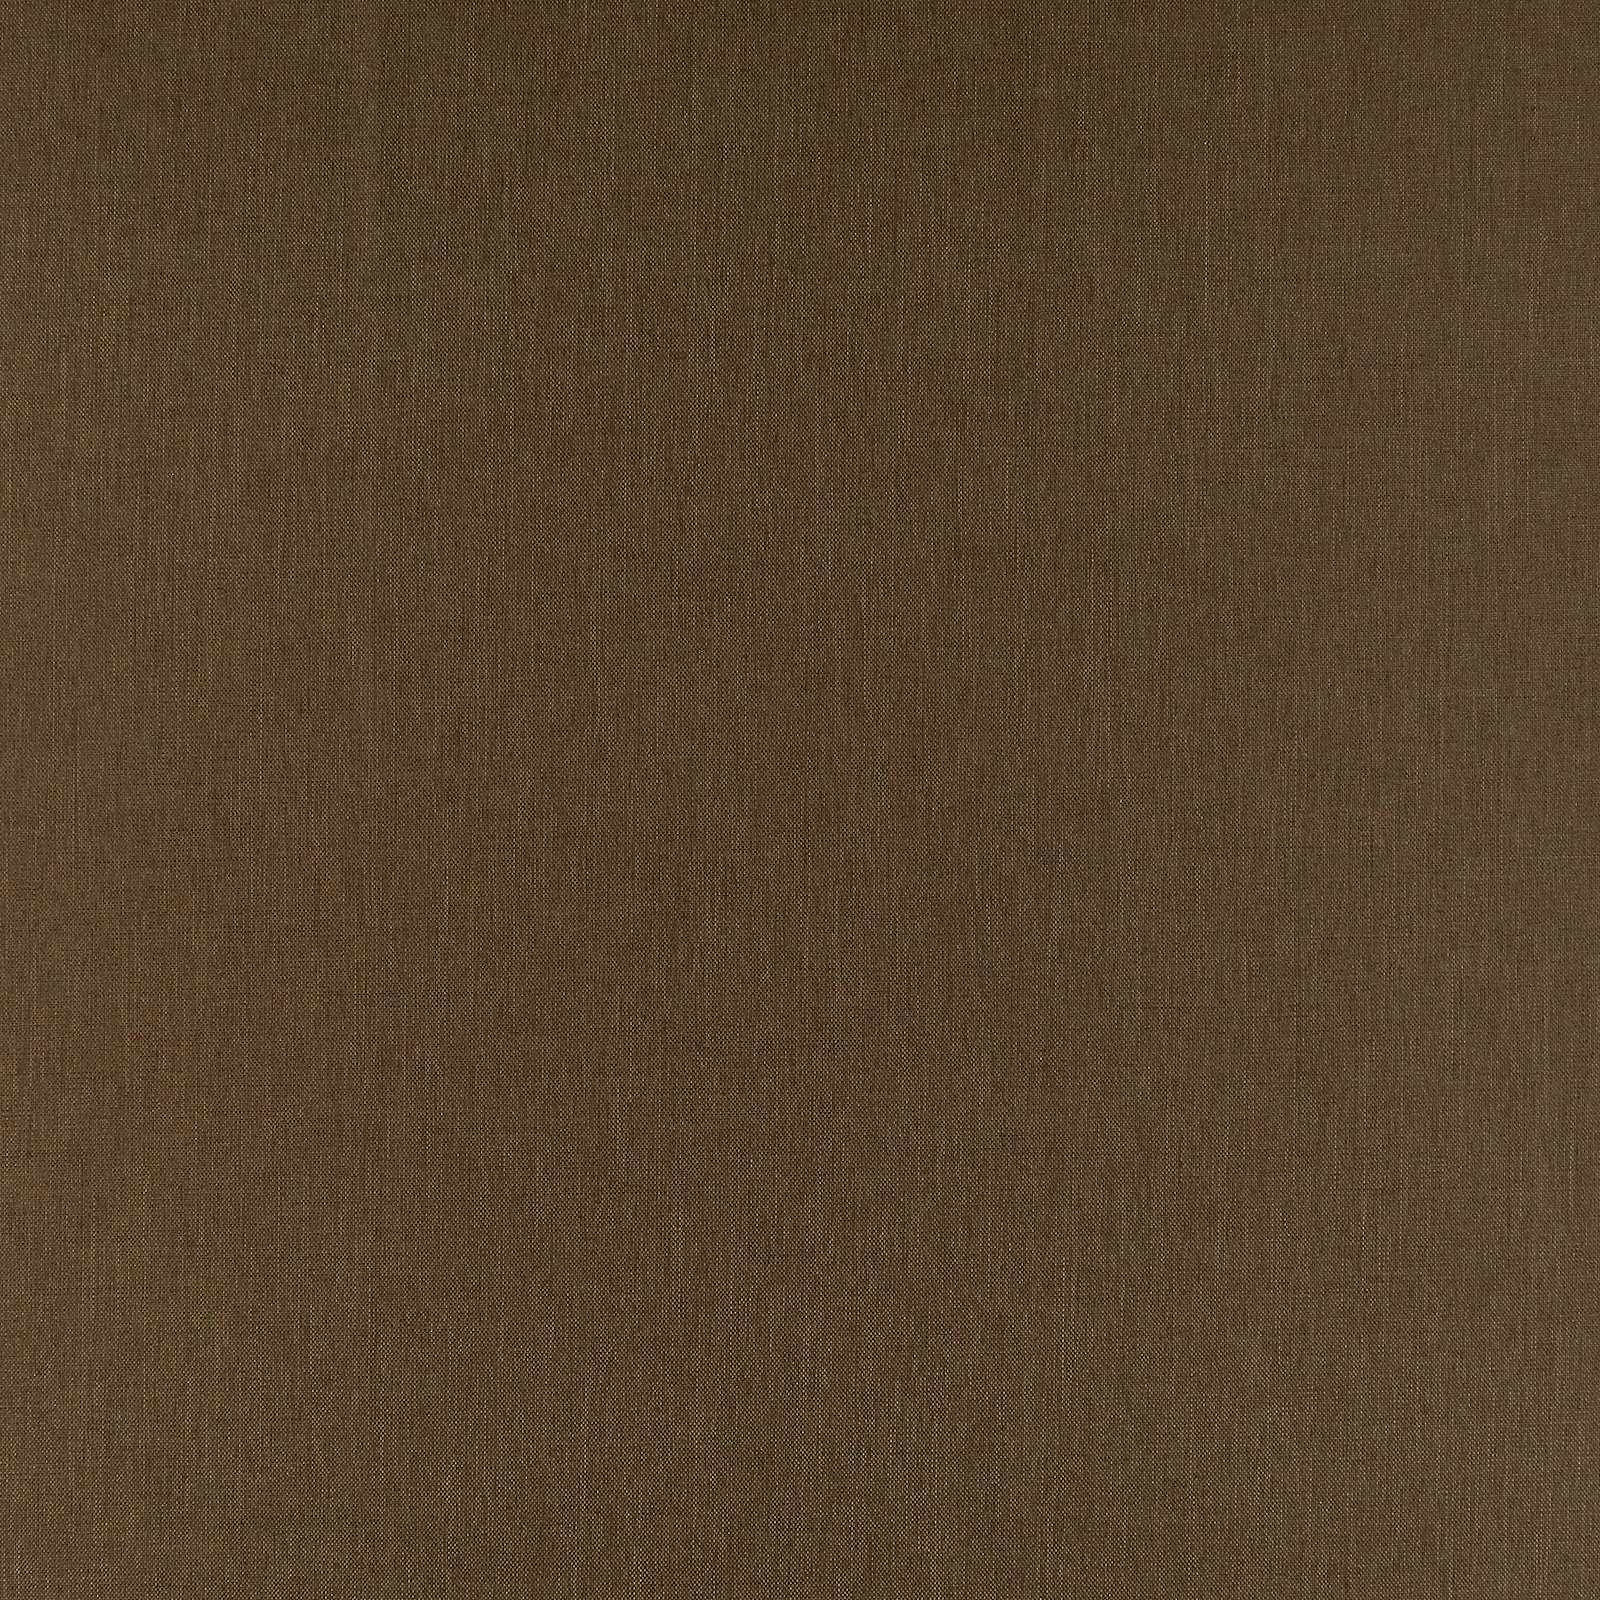 Upholstery fabric dark golden brown mel 826566_pack_solid